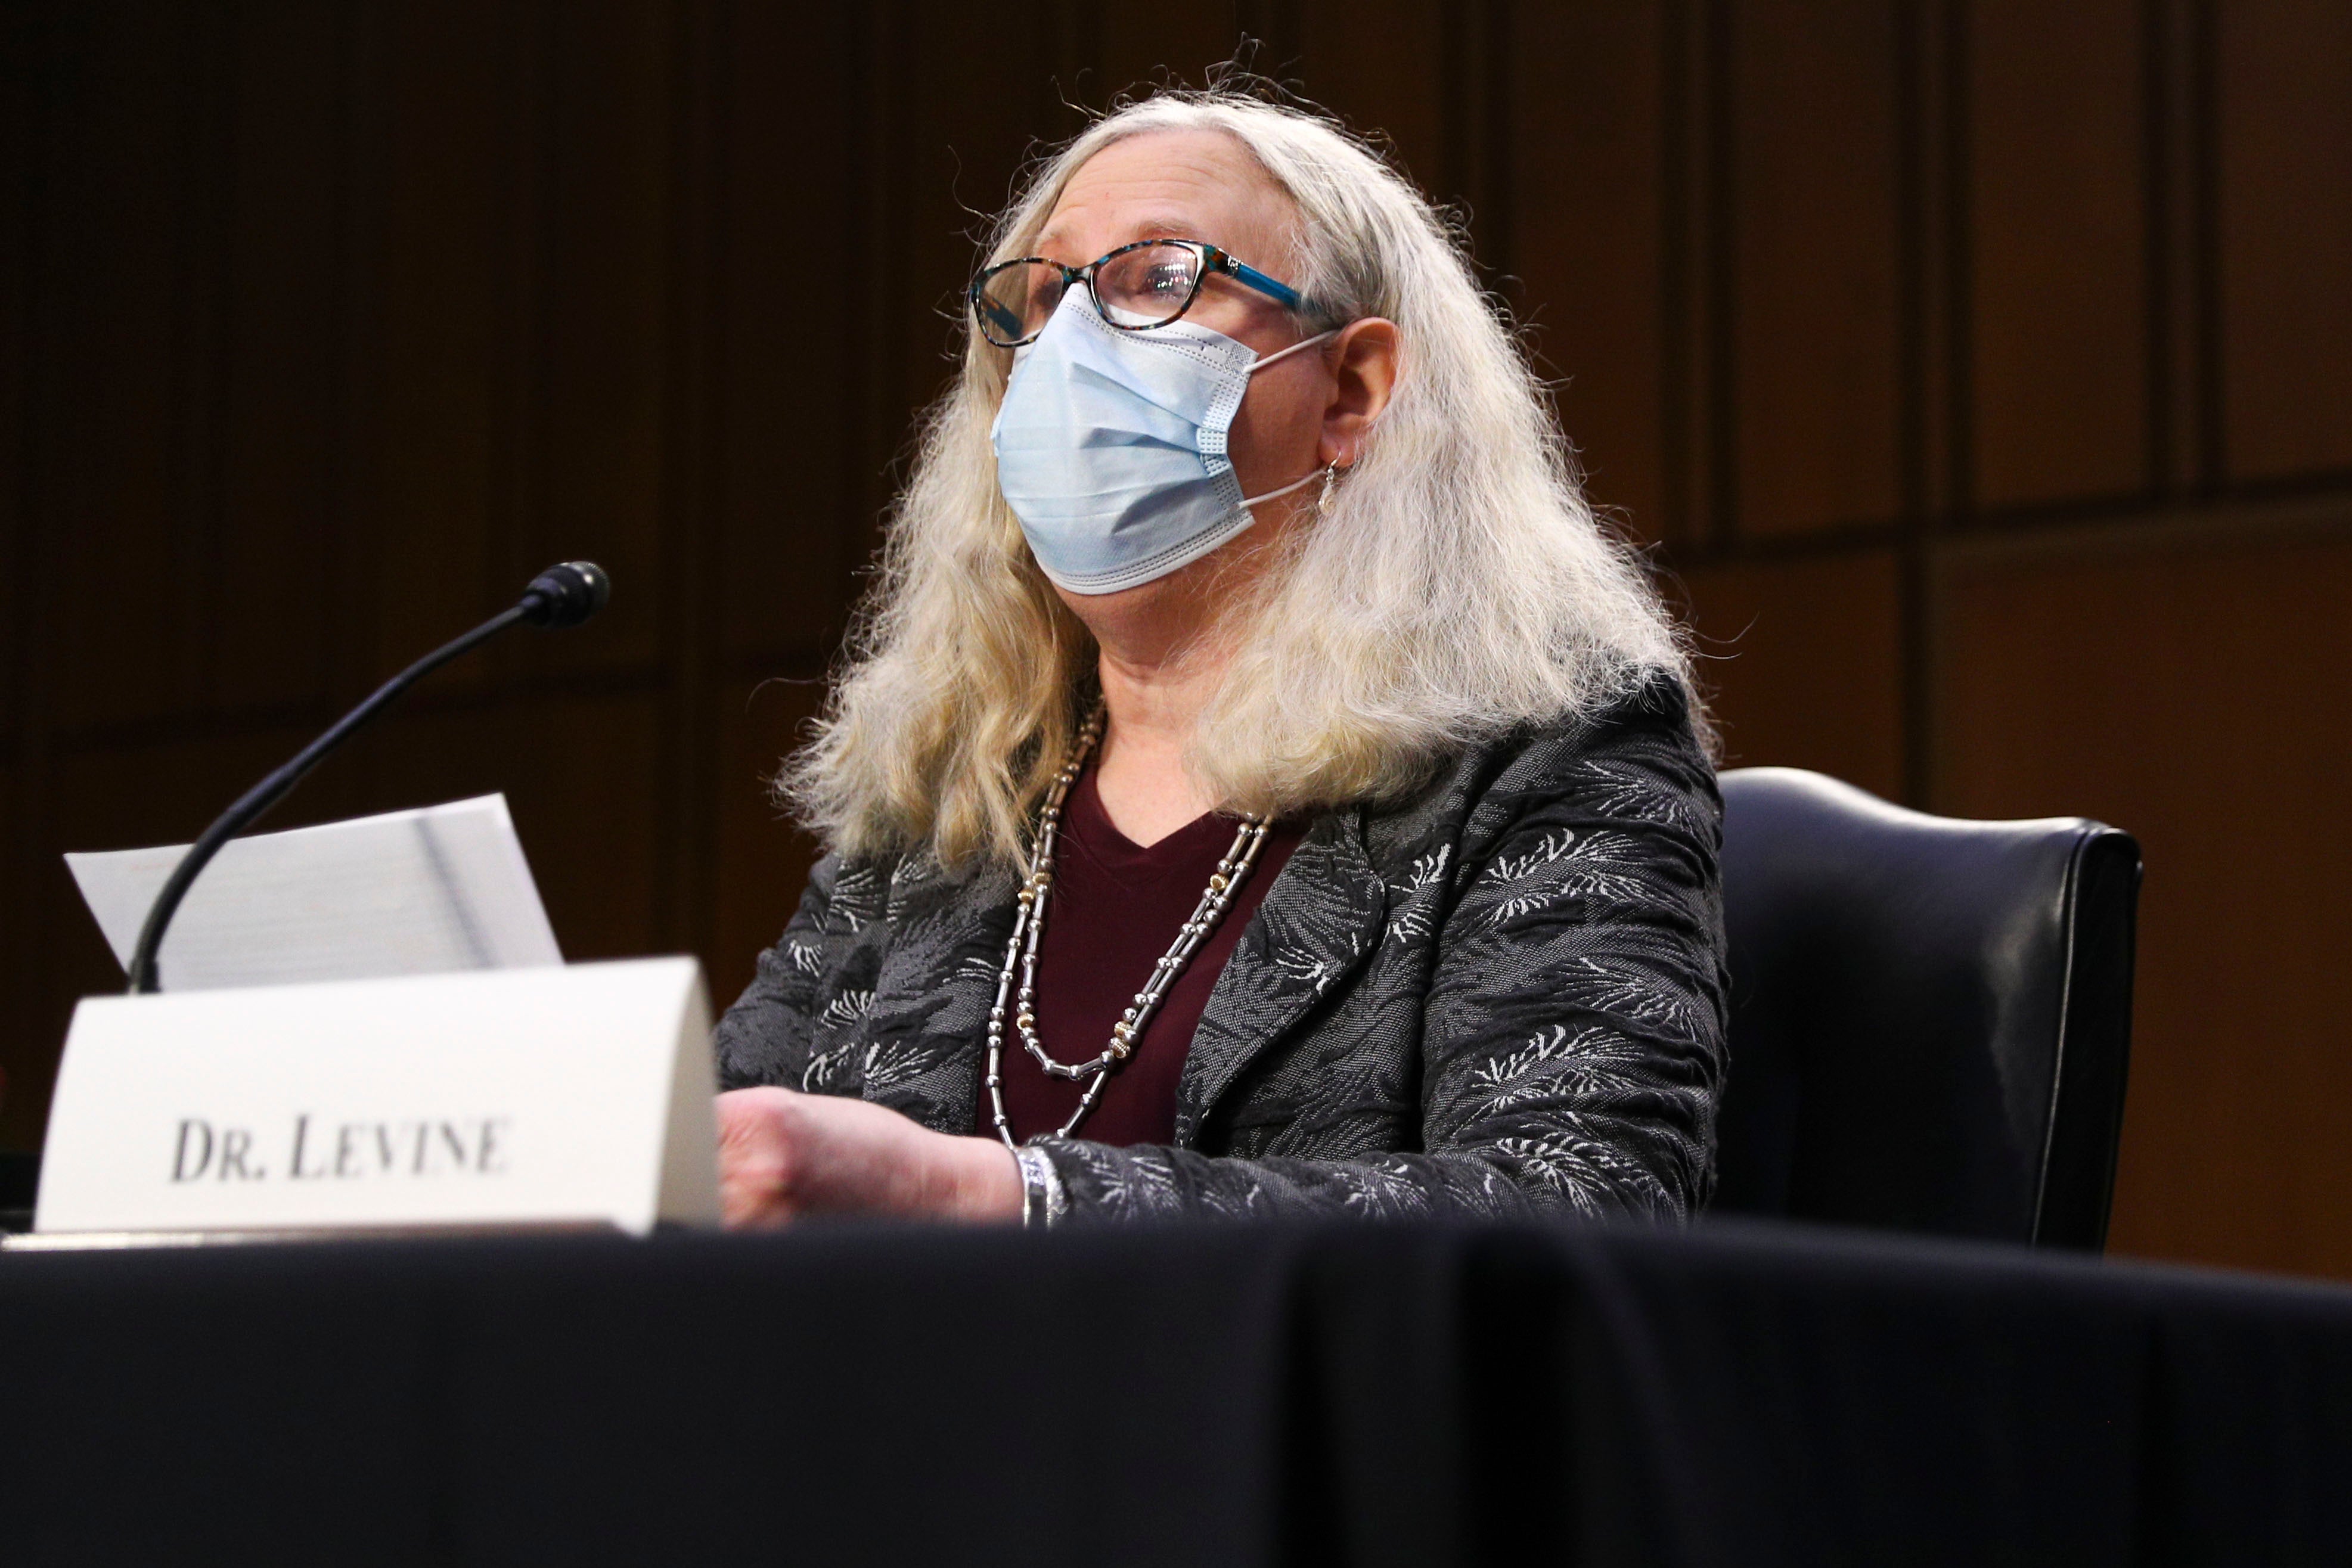 File Image: Rachel Levine, nominee for Assistant Secretary in the Department of Health and Human Services, testifies at her confirmation hearing before the Senate Health, Education, Labor, and Pensions Committee 25 February 2021 on Capitol Hill in Washington DC